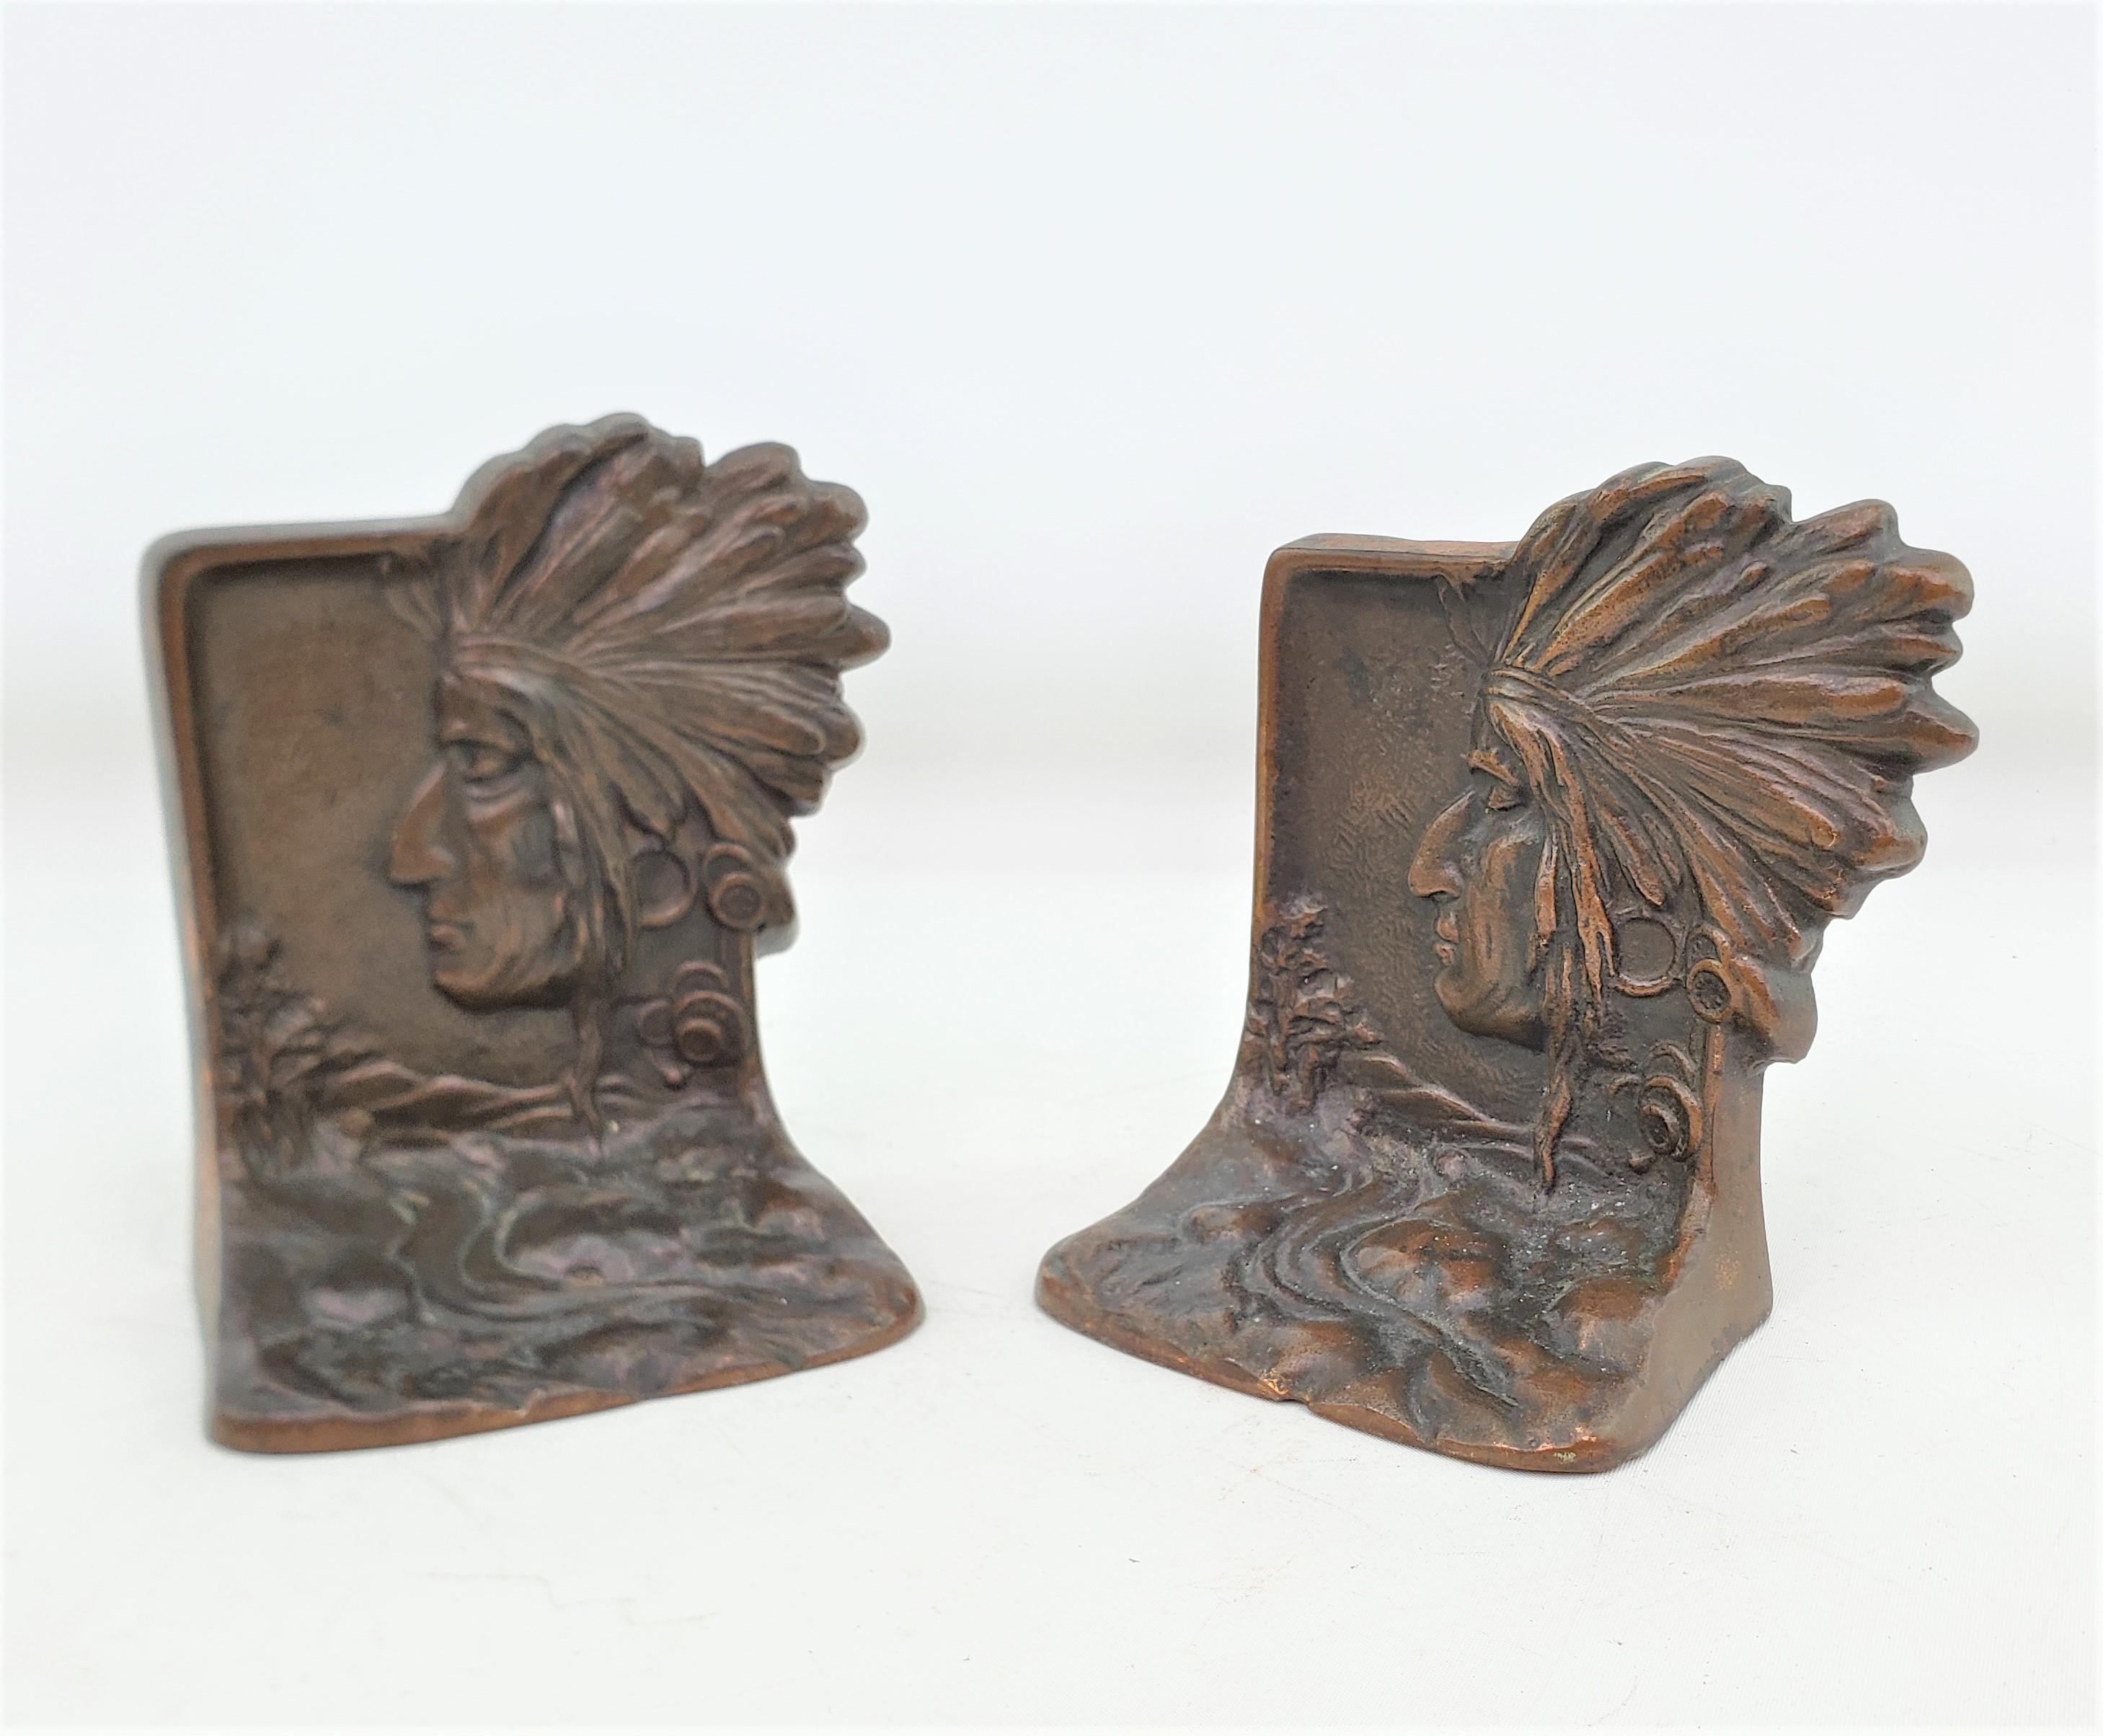 20th Century Antique Art Deco Cast & Patinated Bookends Depicting an Indigenous Warrior For Sale